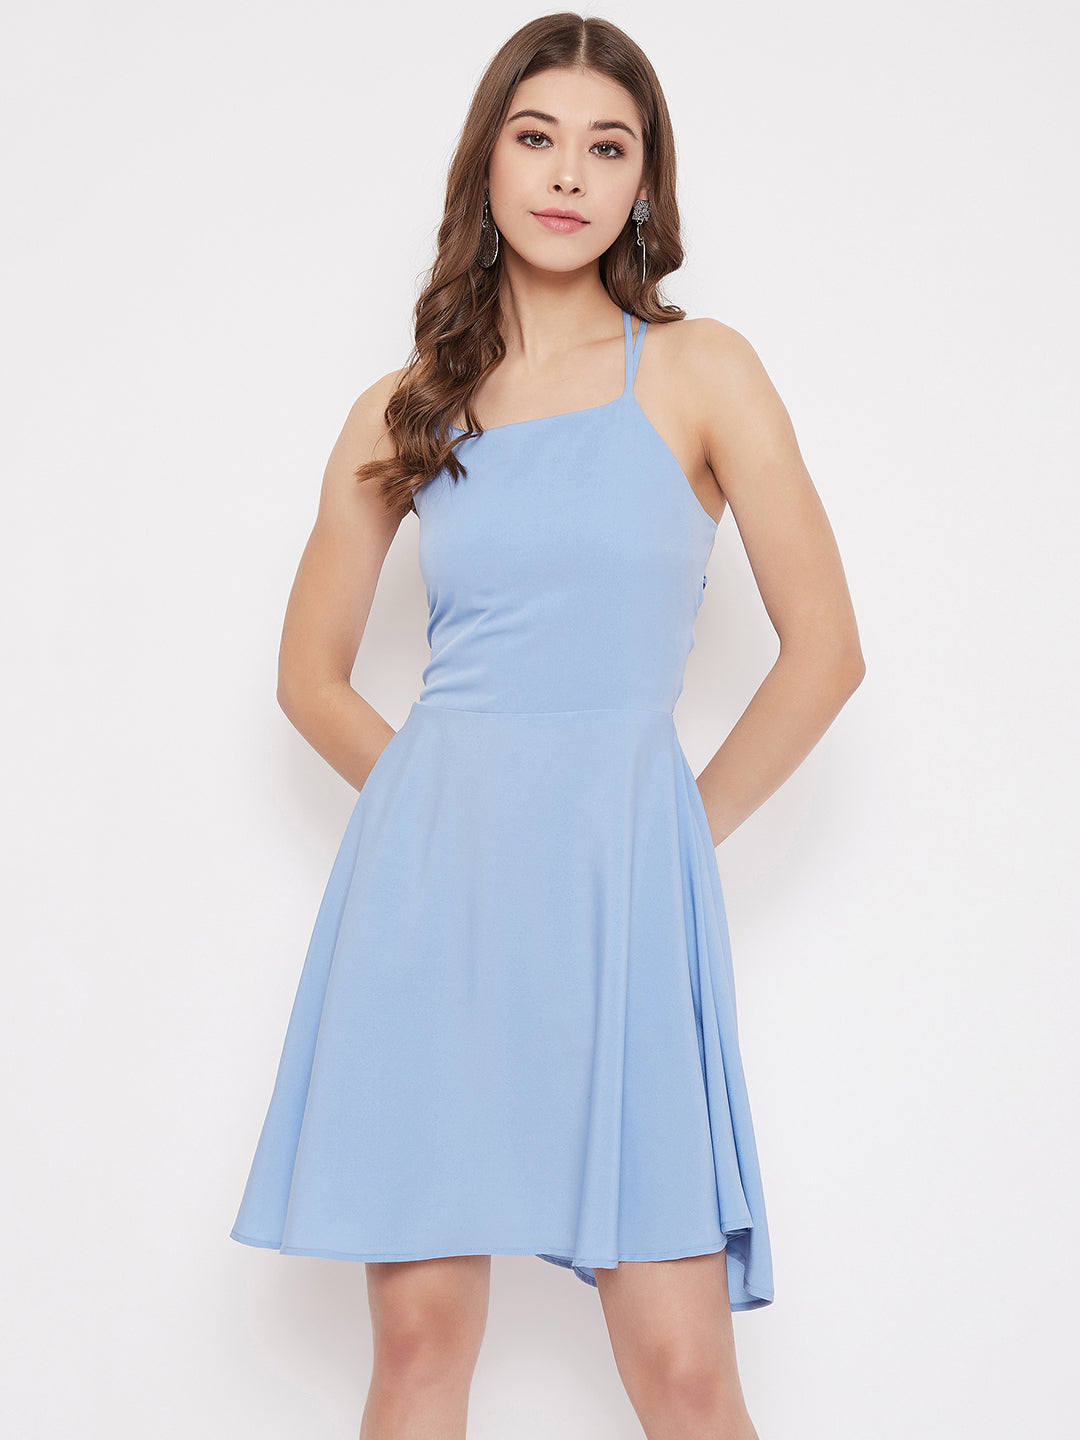 Berrylush Women Solid Blue Caged Tie-Back Fit & Flare Mini Dress